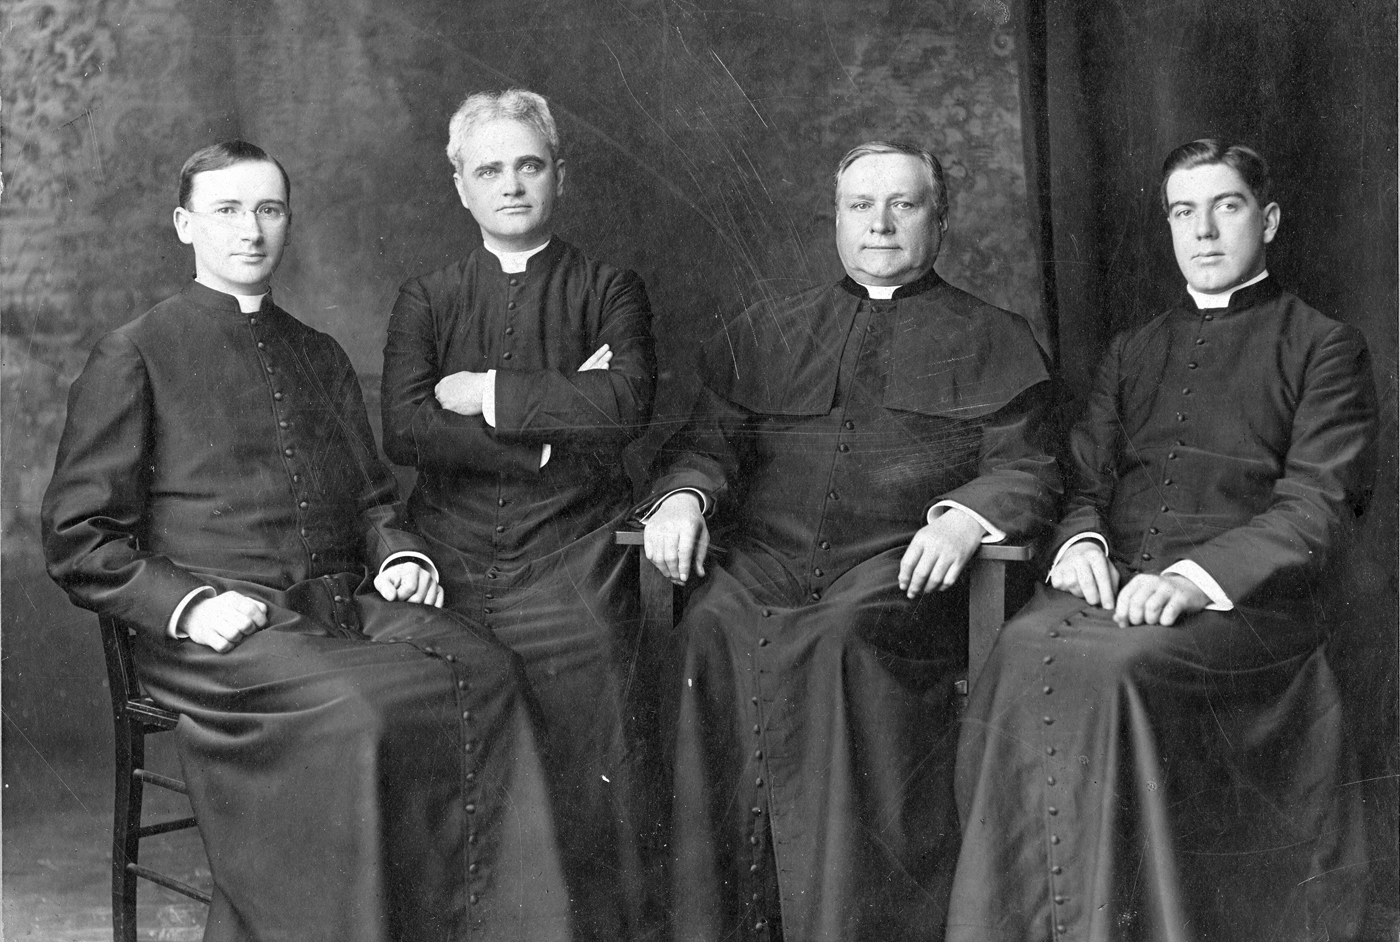 Priests, likely from St. Mary of the Assumption Church